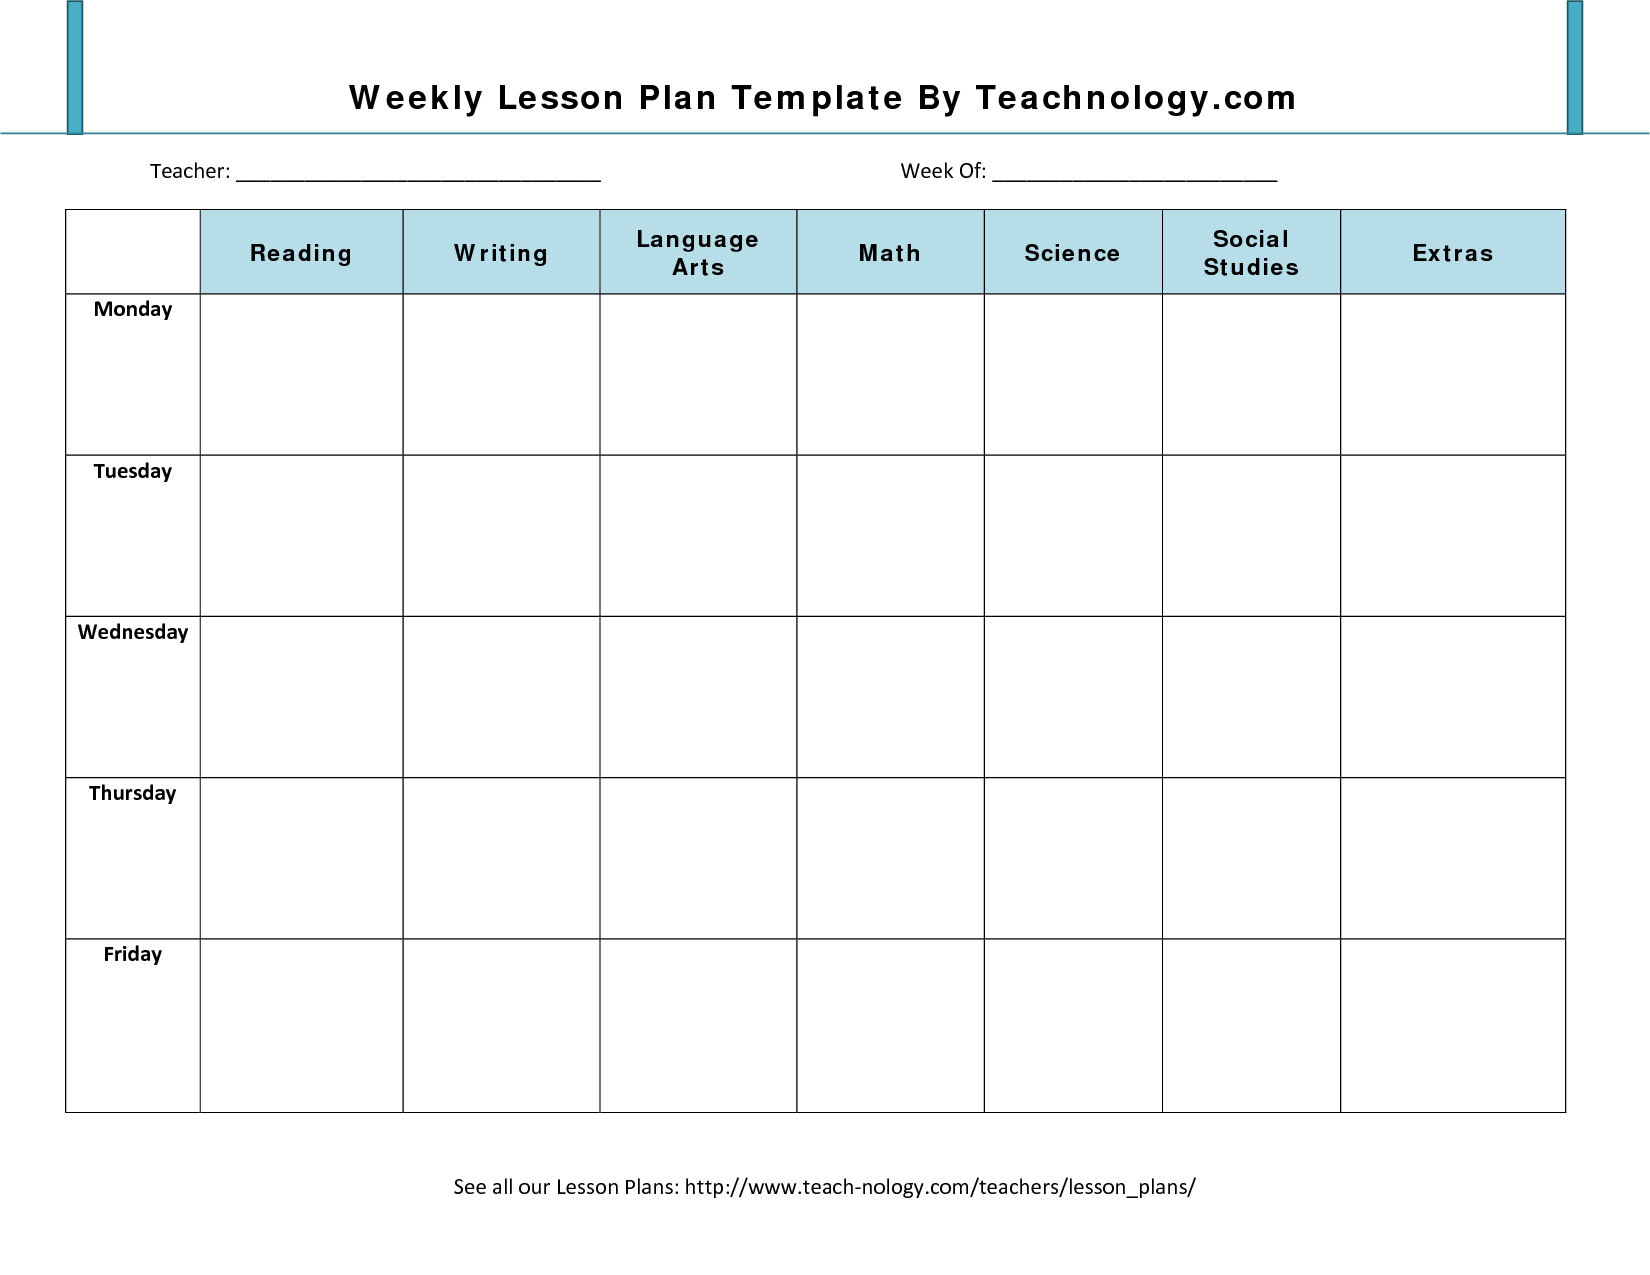 Lesson Plan Format 7 Weekly Lesson Plan Template For